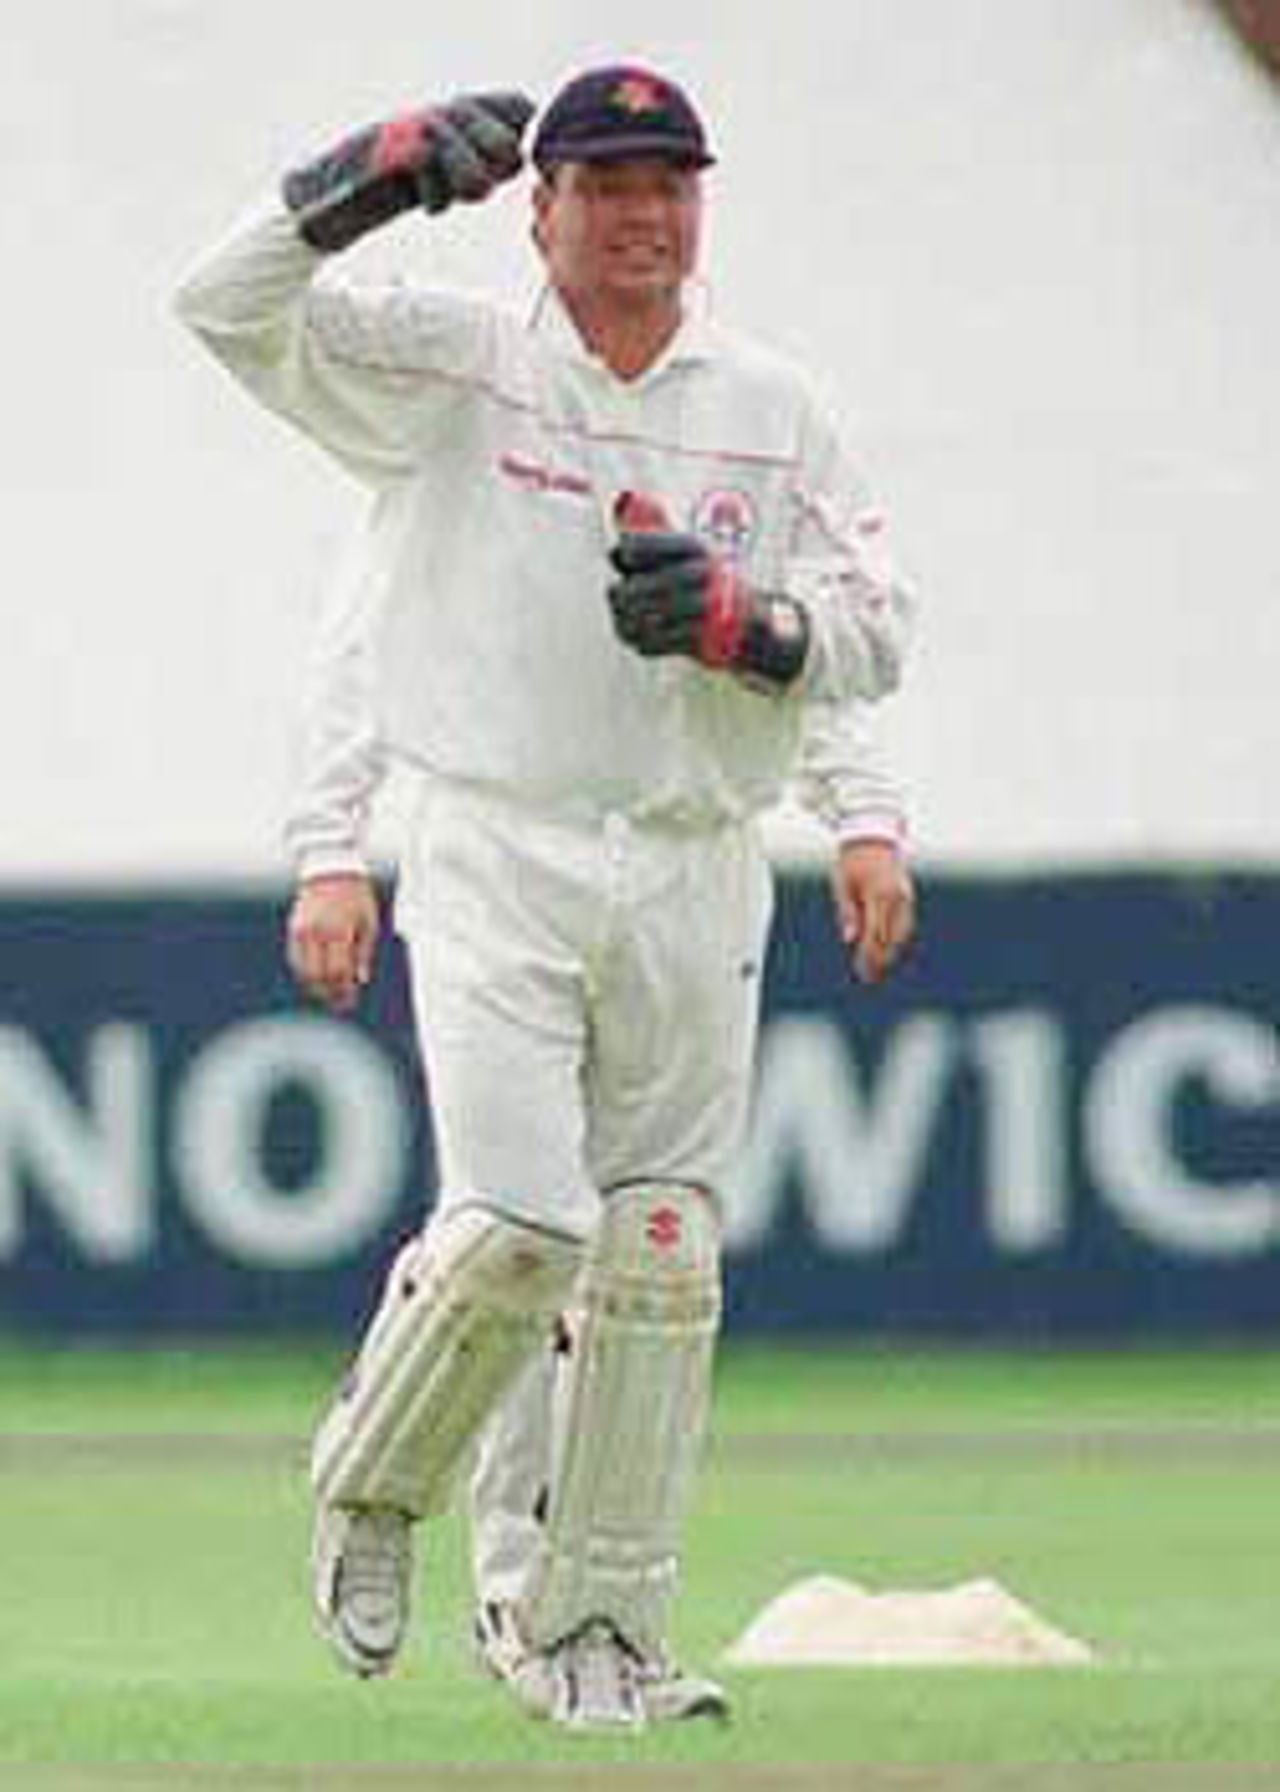 Warren Hegg equals the record for most catches in a career by a Lancashire player, PPP healthcare County Championship Division One, 2000, Lancashire v Somerset, Old Trafford, Manchester, 08-10 September 2000 (Day 3).